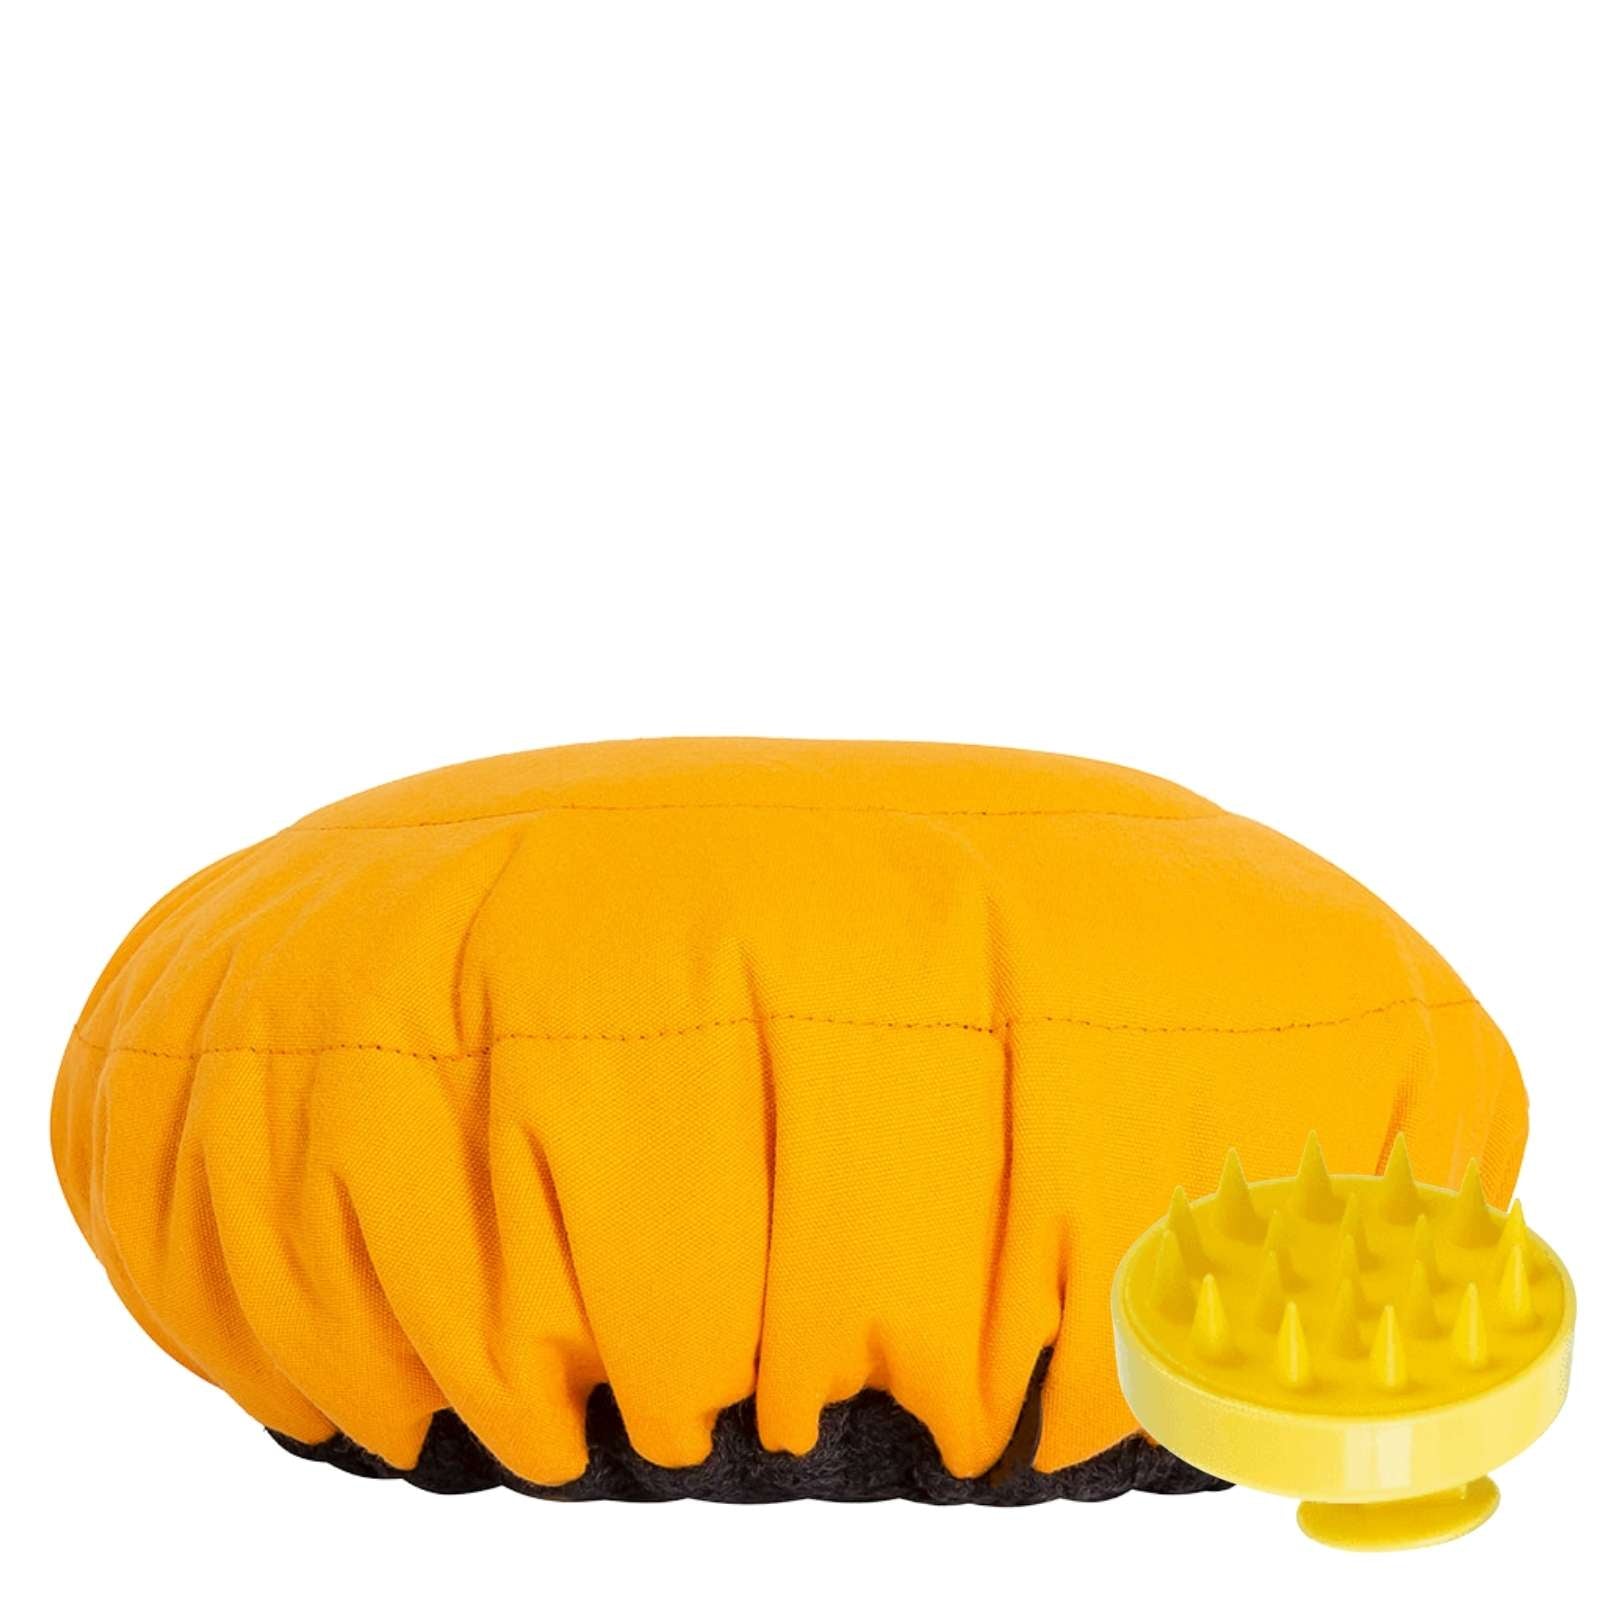 Lava Cap microwavable heat cap UK stock, with scalp massager in Yellow